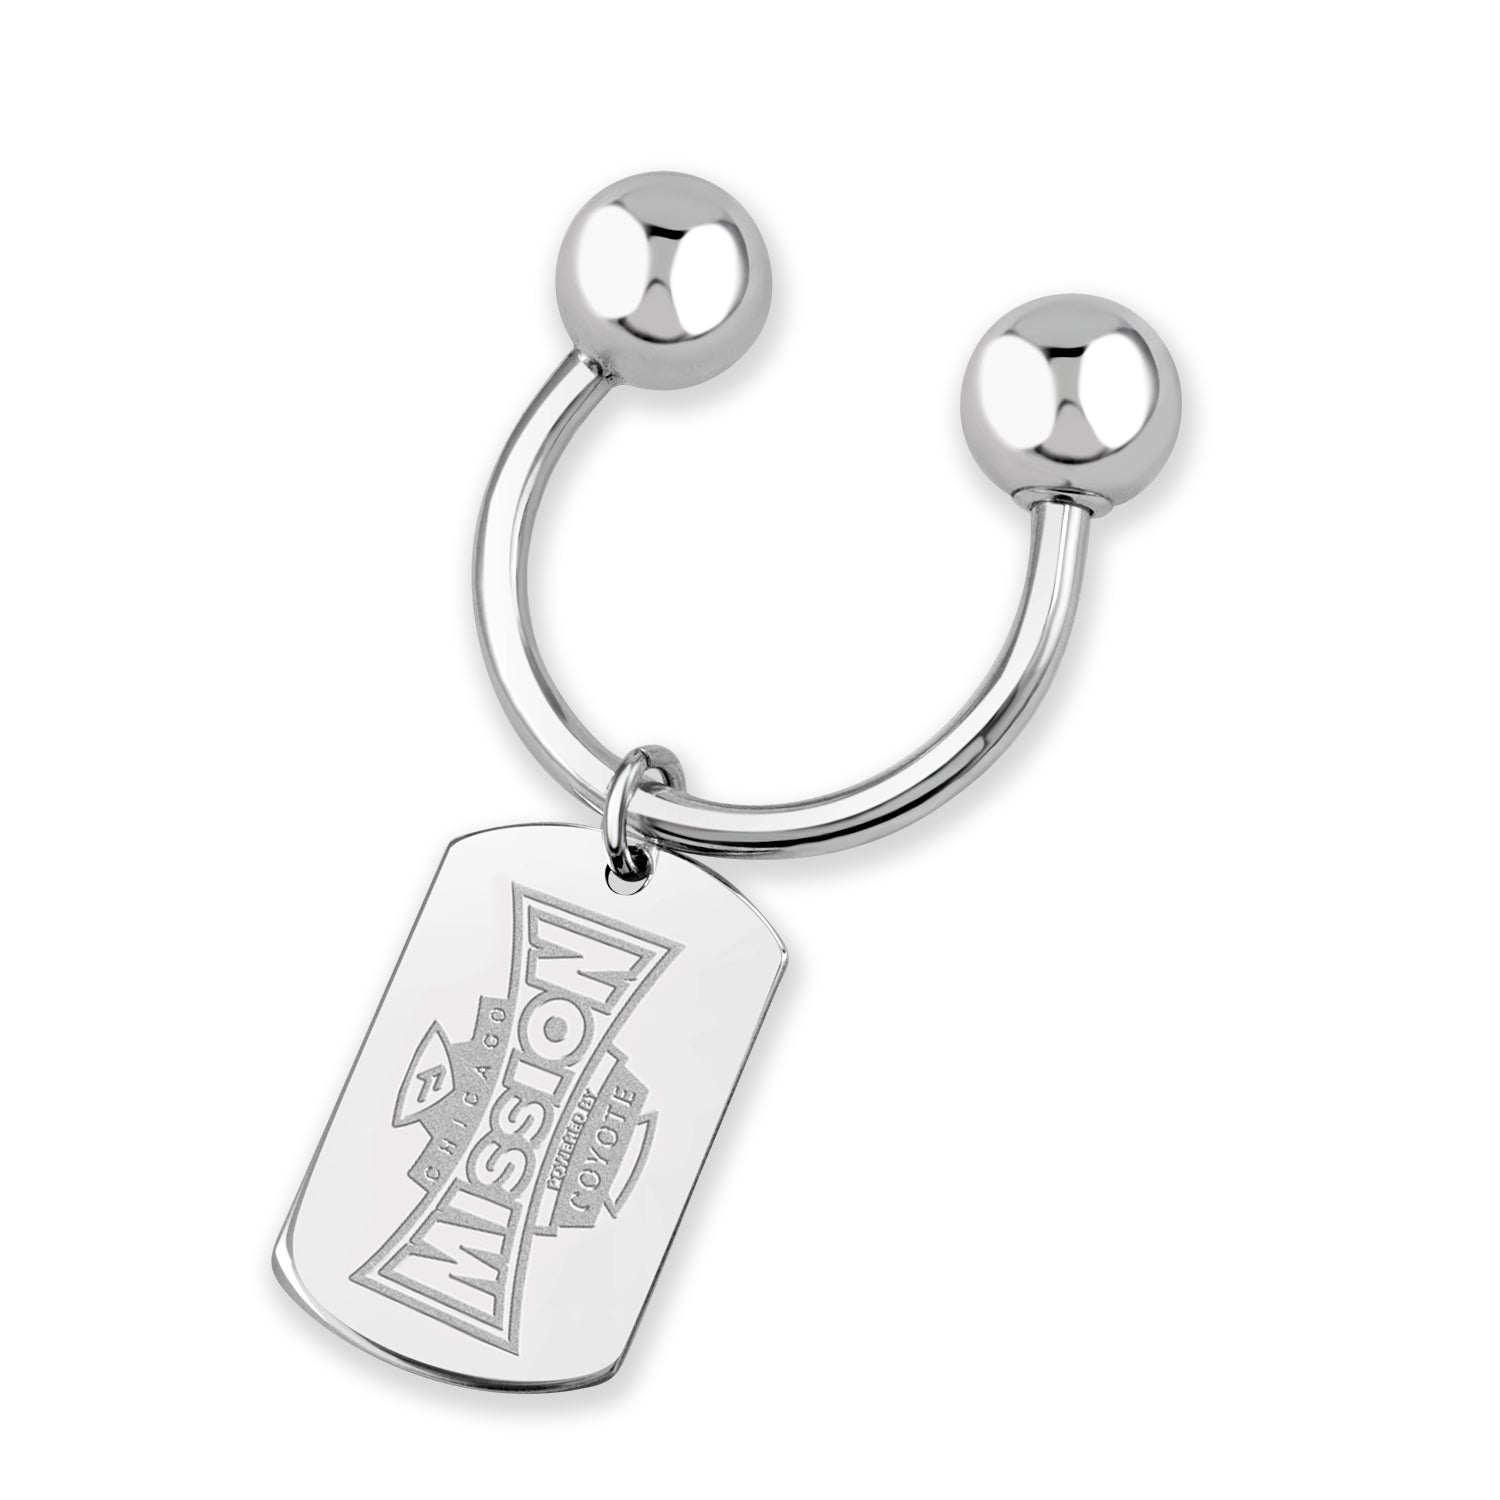 Chicago Mission Key Chain Tag